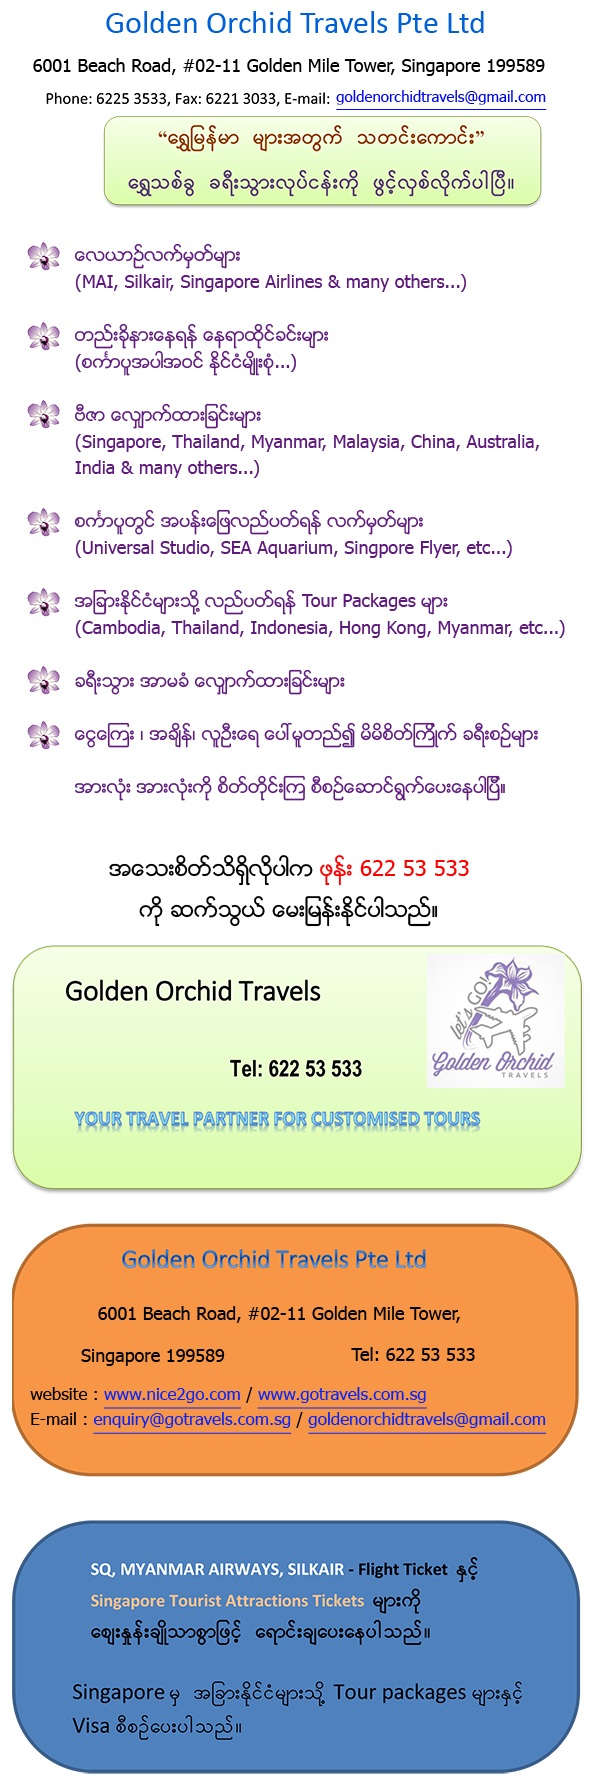 Golden Orchid Travels